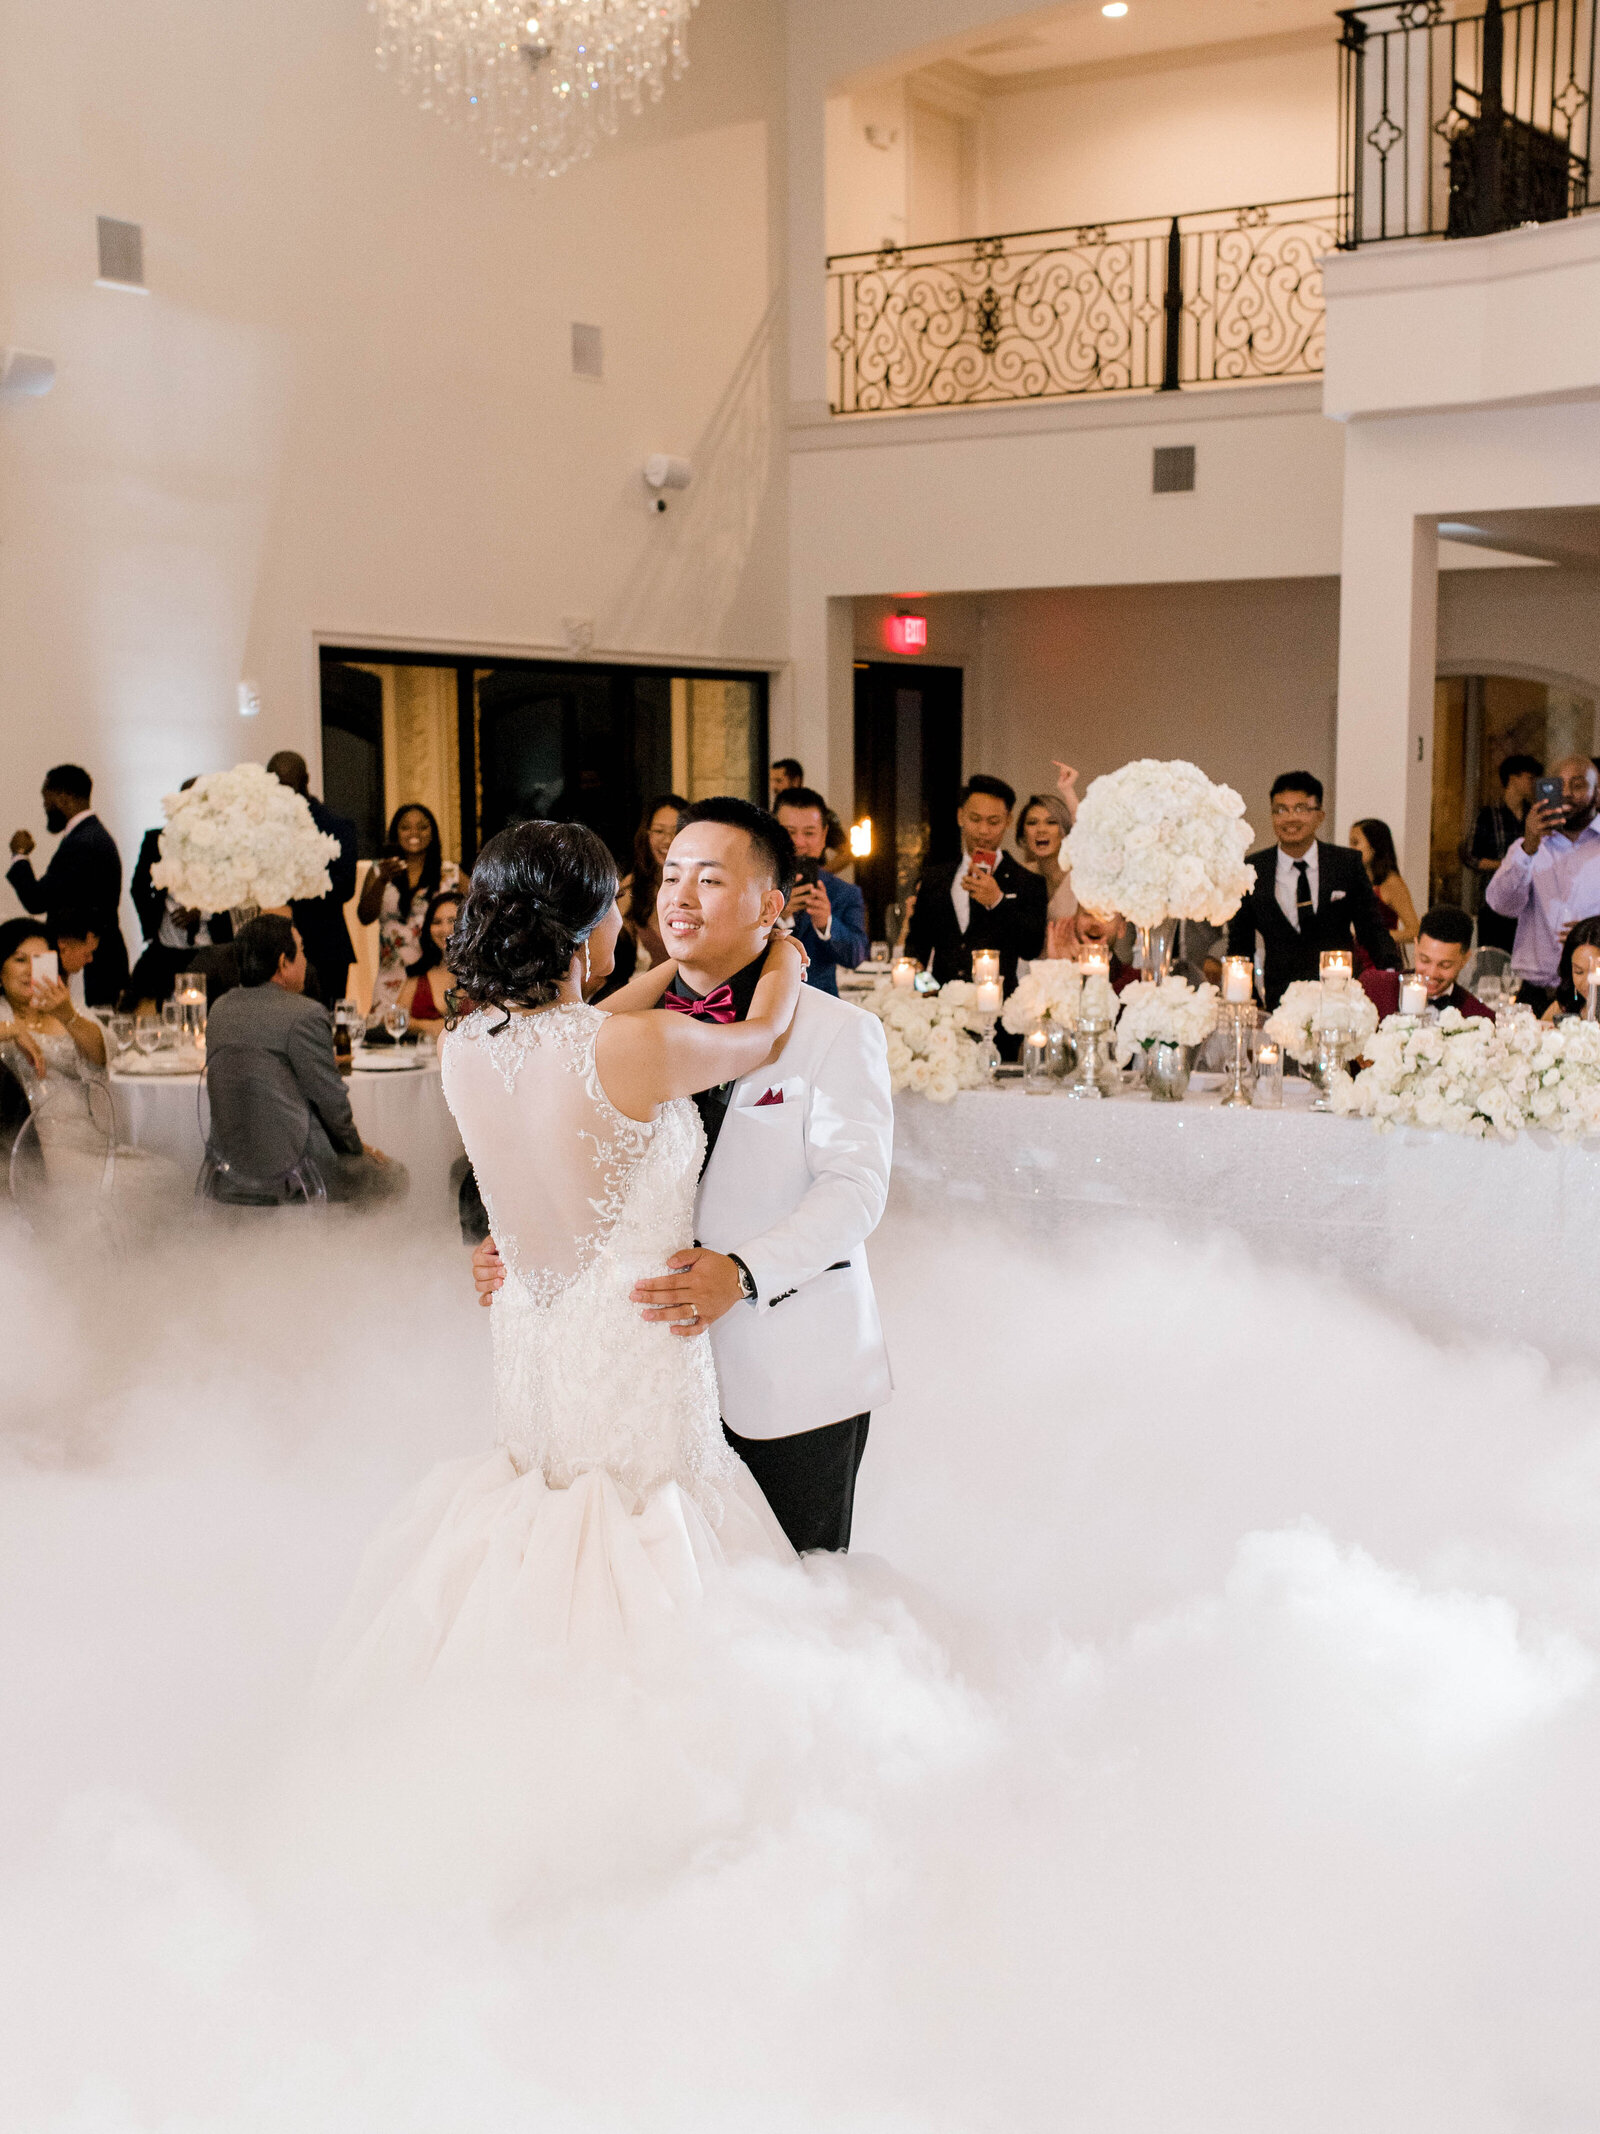 Bride and groom at their reception having their first dance in white fog